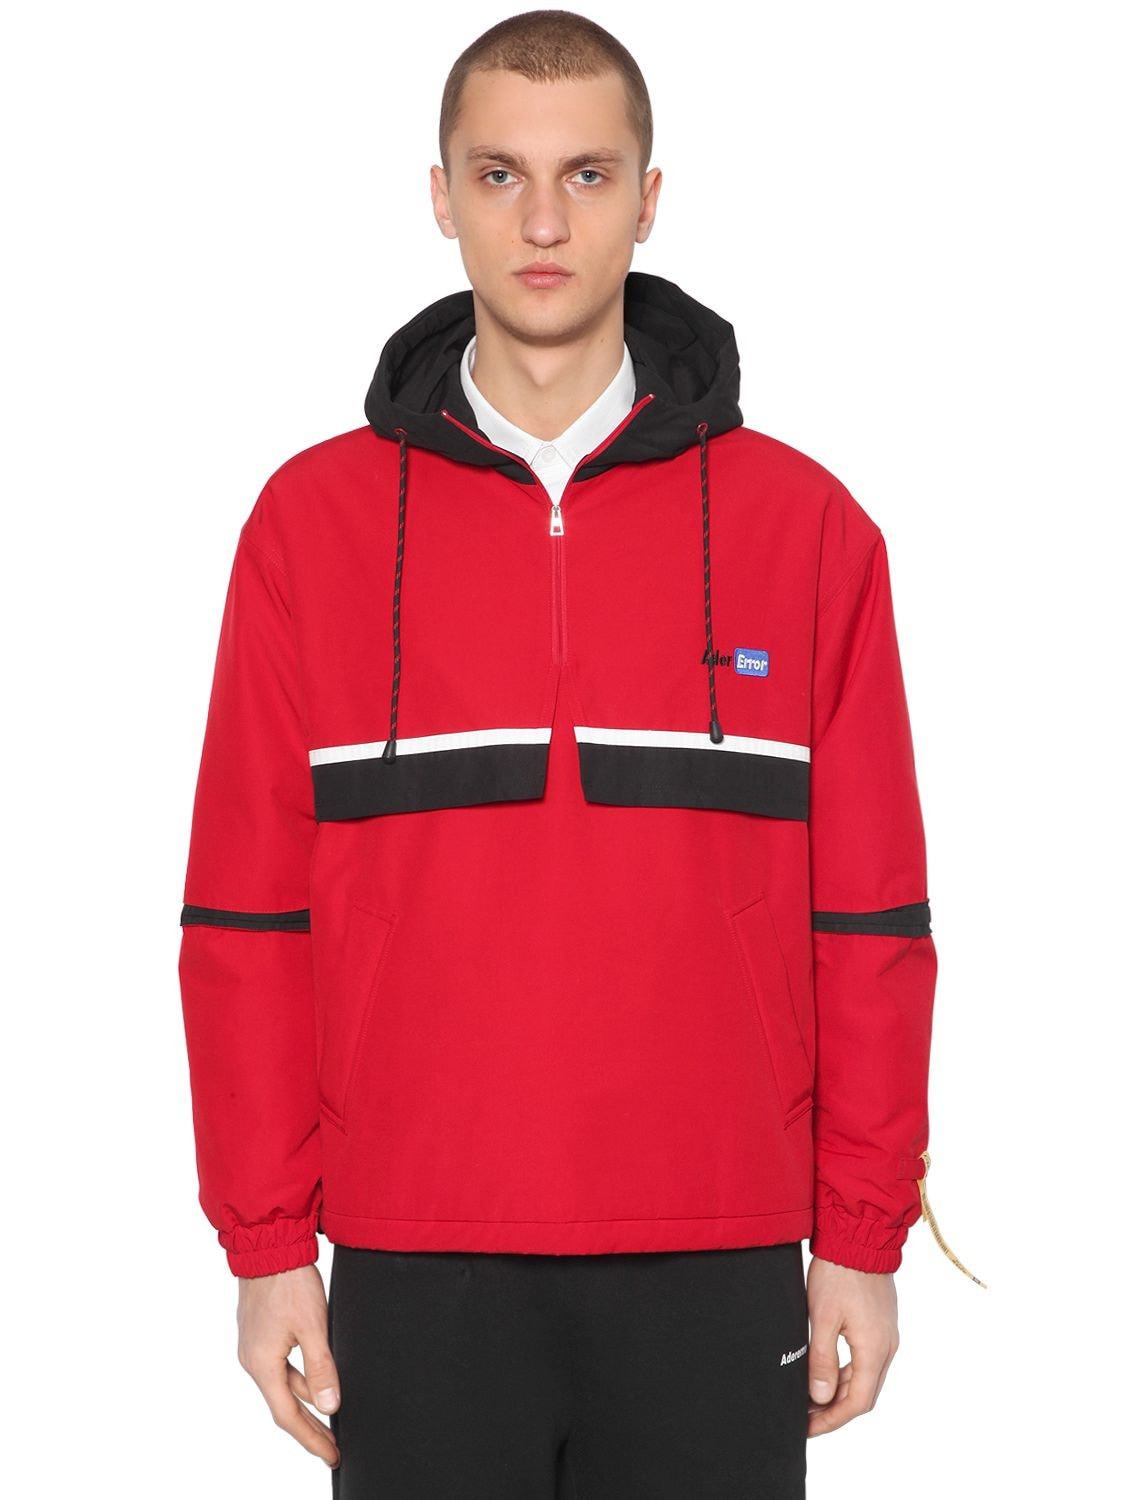 Ader Error Hoodie Tech Anorak W/ Back Vent In Red